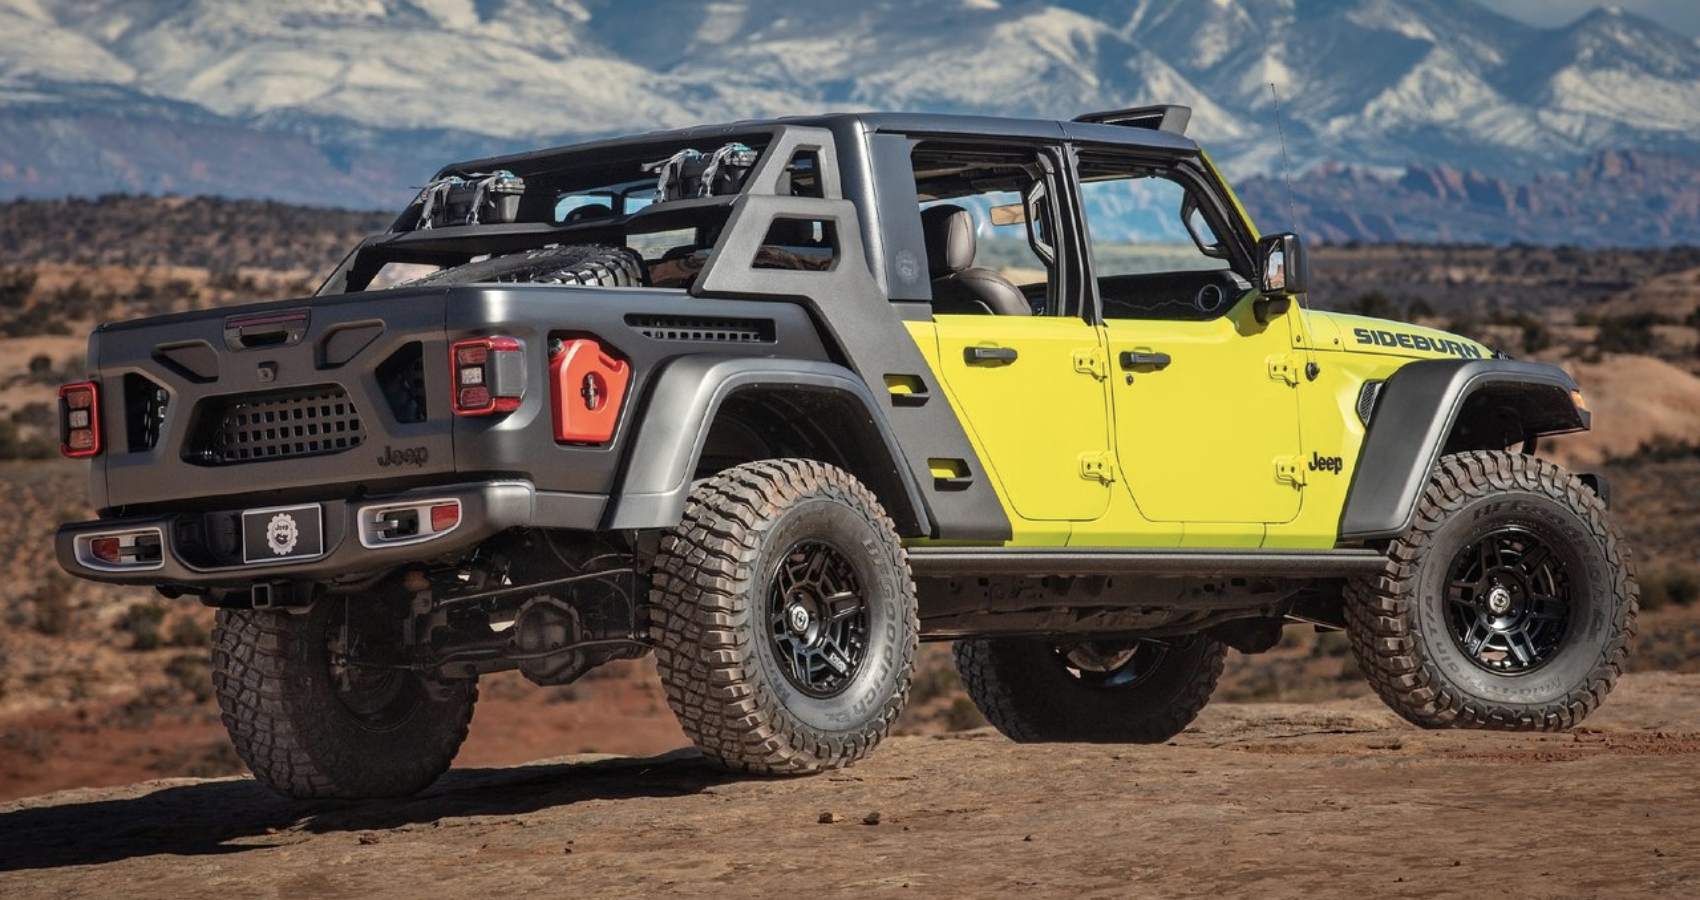 How The Jeep Gladiator Rubicon Sideburn Concept Just Reinvented The Truck Bed